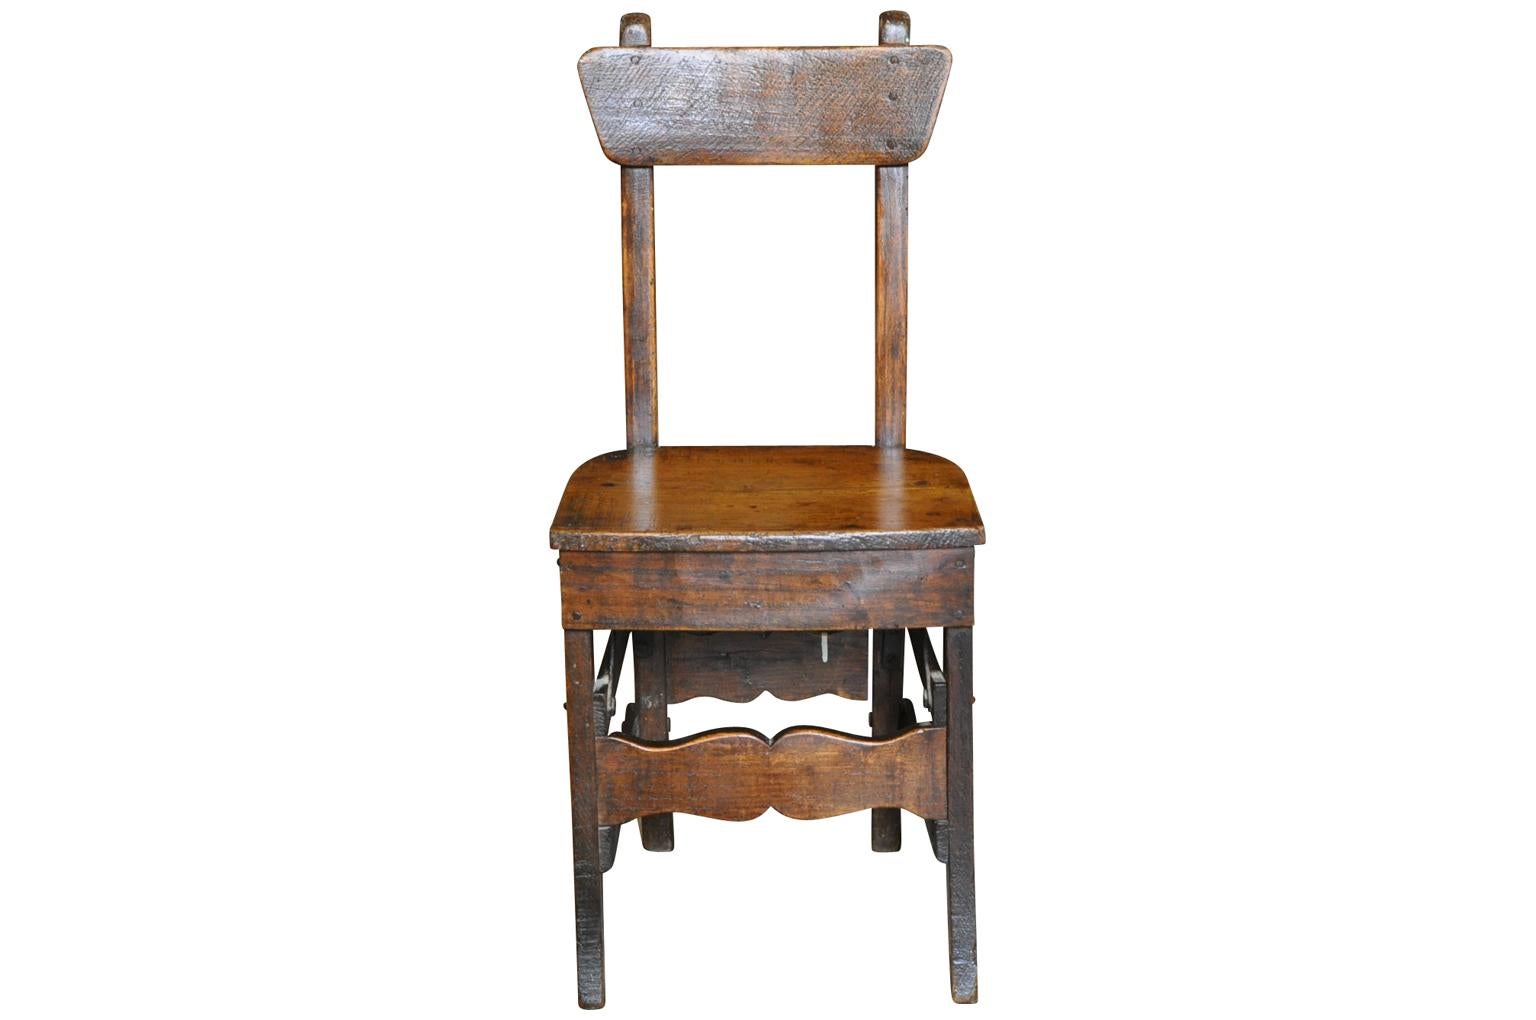 A delightful and charming child's chair from the South of France. Soundly constructed from richly stained pine and beechwood with iron supports. A wonderful accent piece for any child's bedroom or any living area.